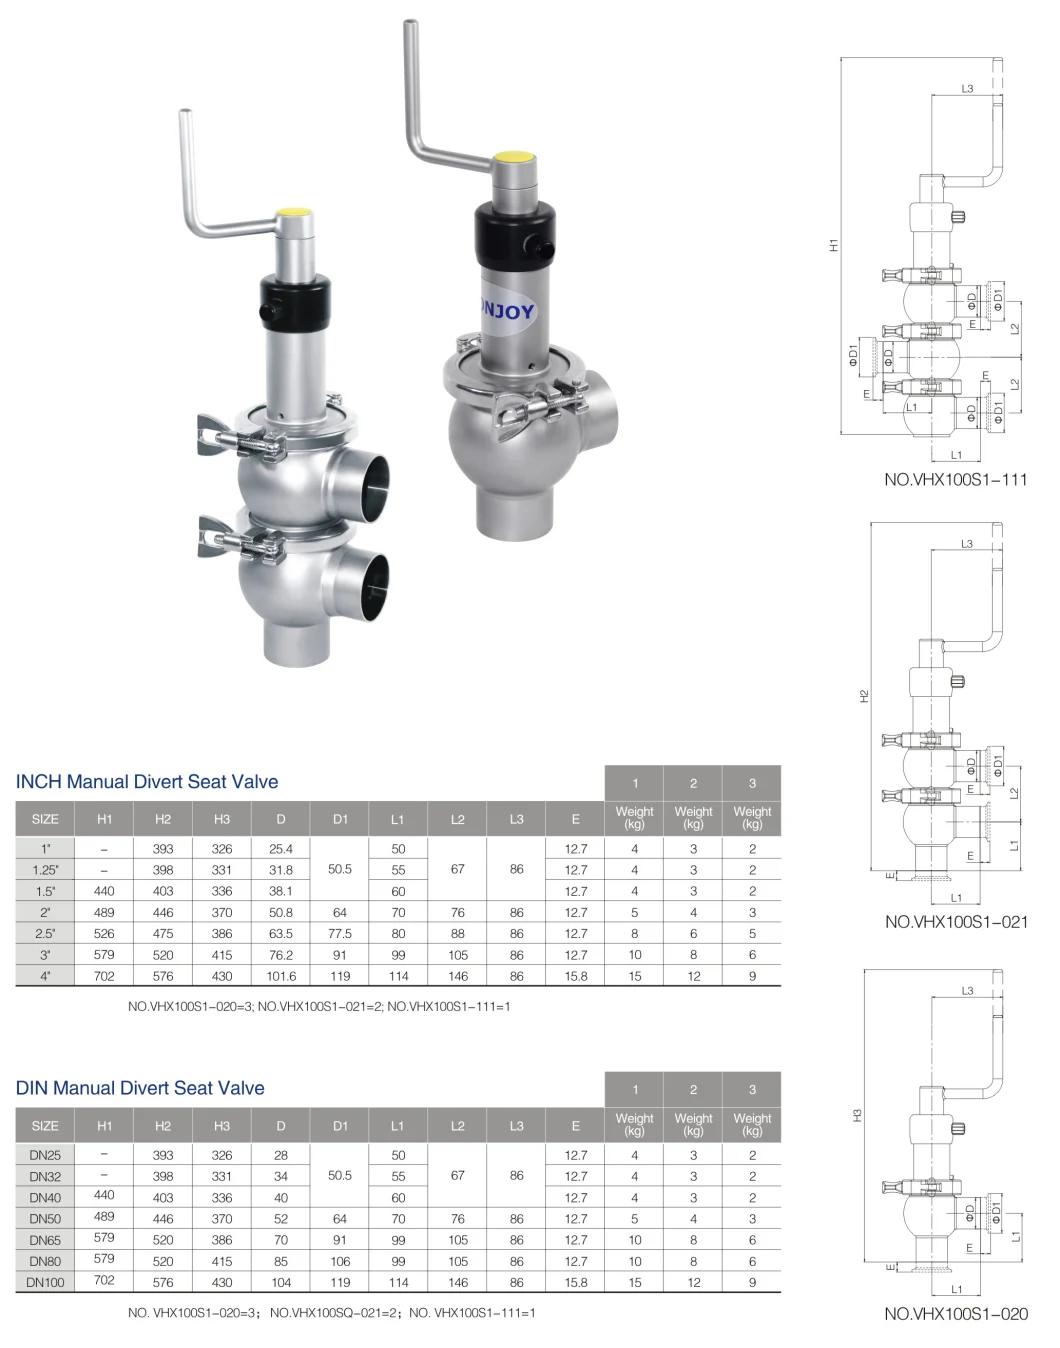 Donjoy 3A Certified Sanitary Pneumatic Shut-off and Diverter Valve